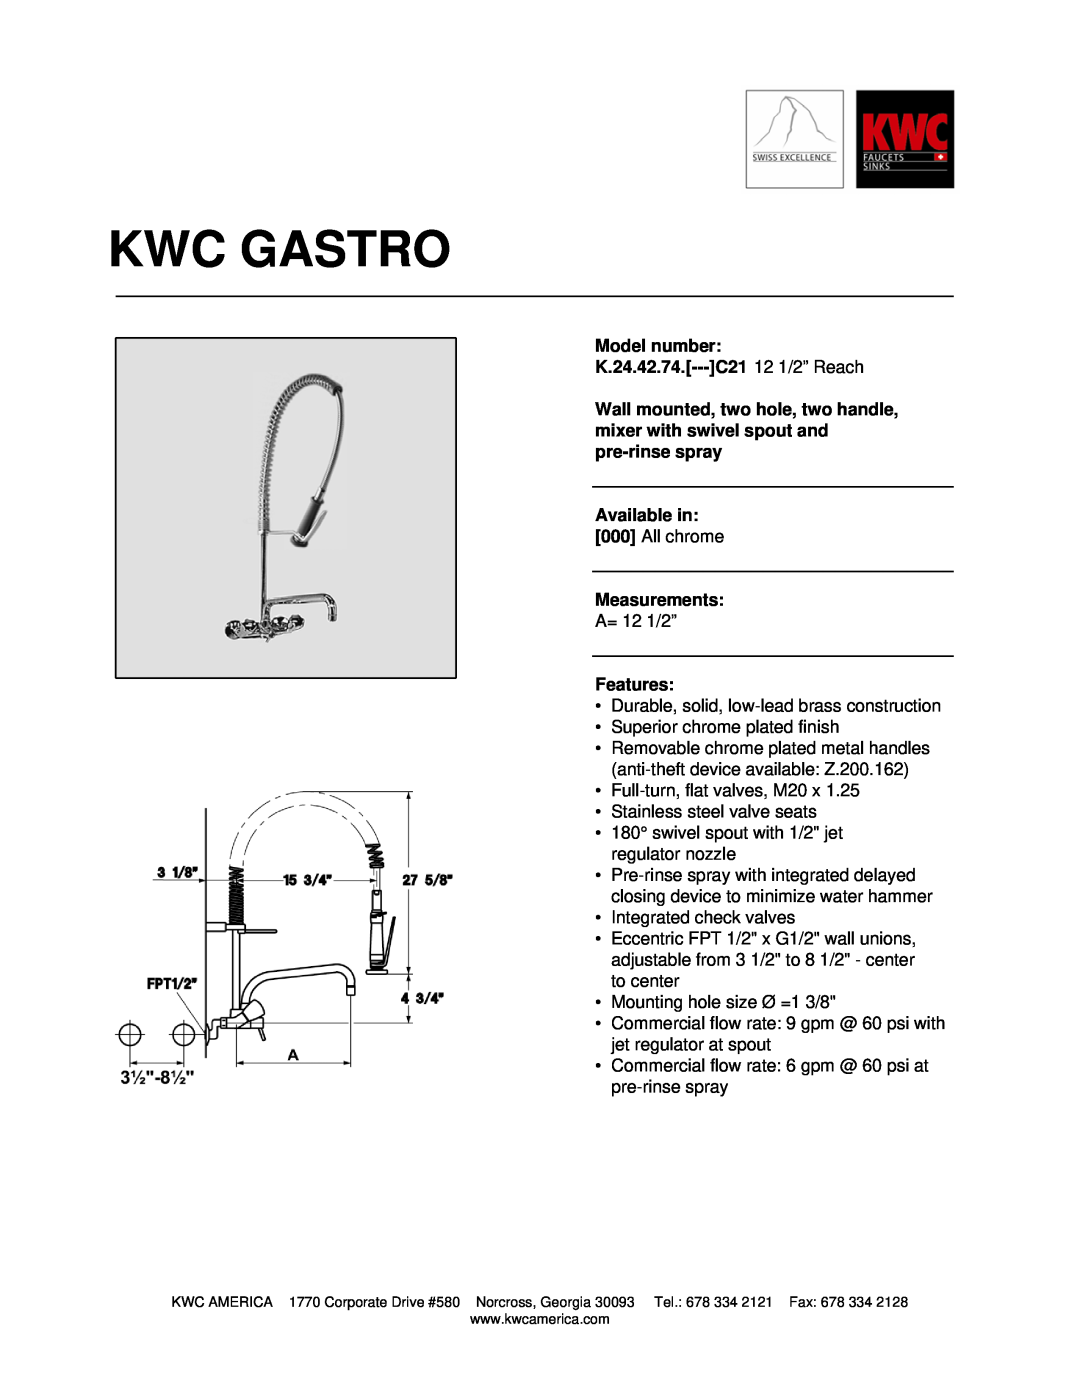 KWC manual Kwc Gastro, Model number K.24.42.74.---C21 12 1/2” Reach, Available in, Measurements, Features 